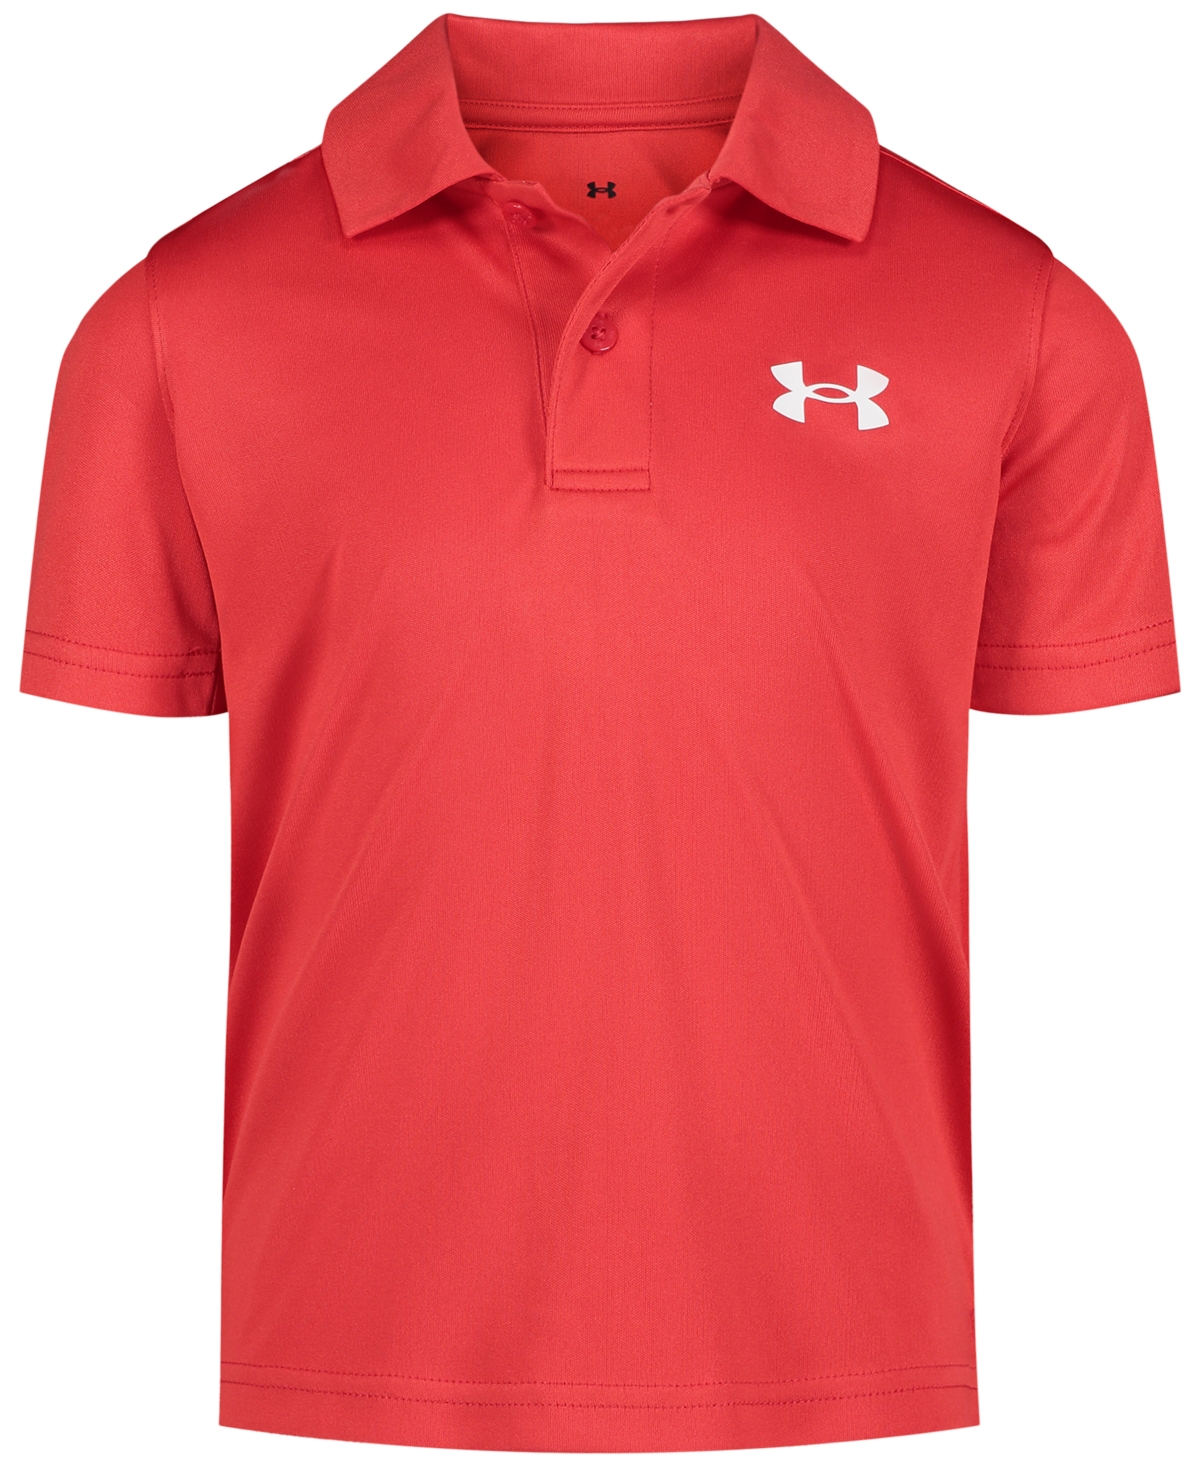 Under Armour Babies' Toddler Boys Matchplay Solid Polo Shirt In Bright Red